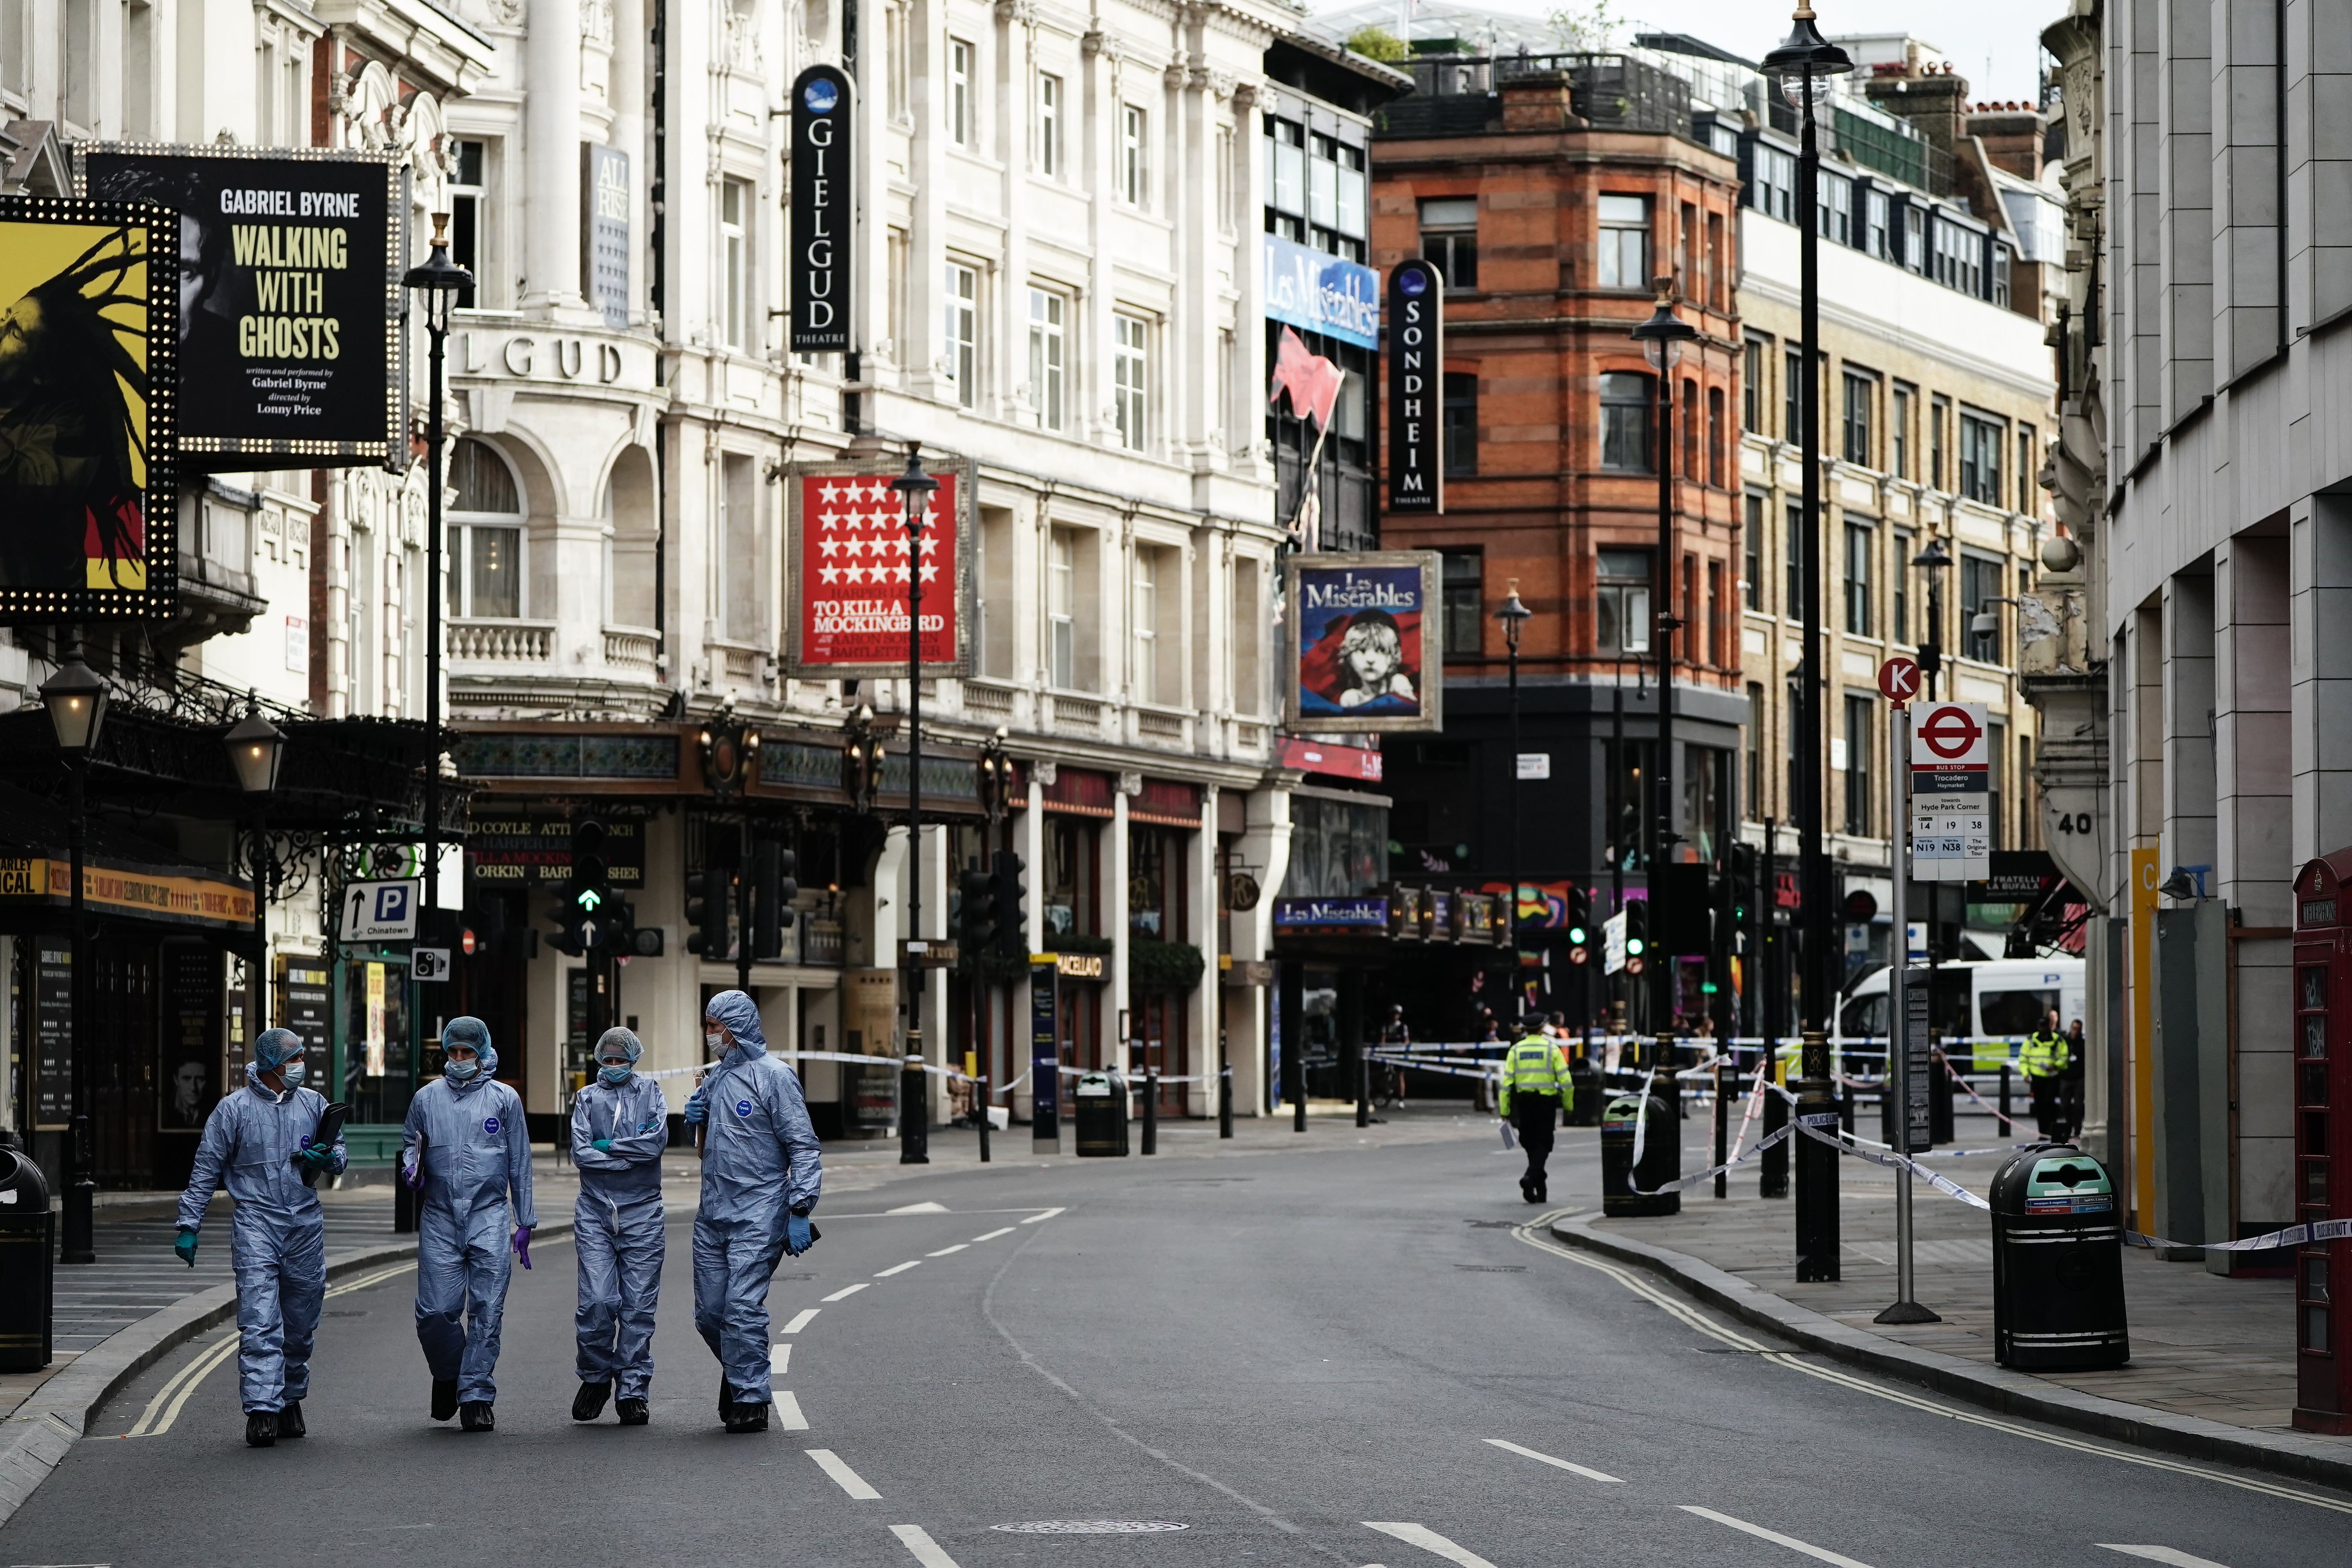 Forensics officers and police at the scene in Shaftesbury Avenue, central London (Aaron Chow/PA)